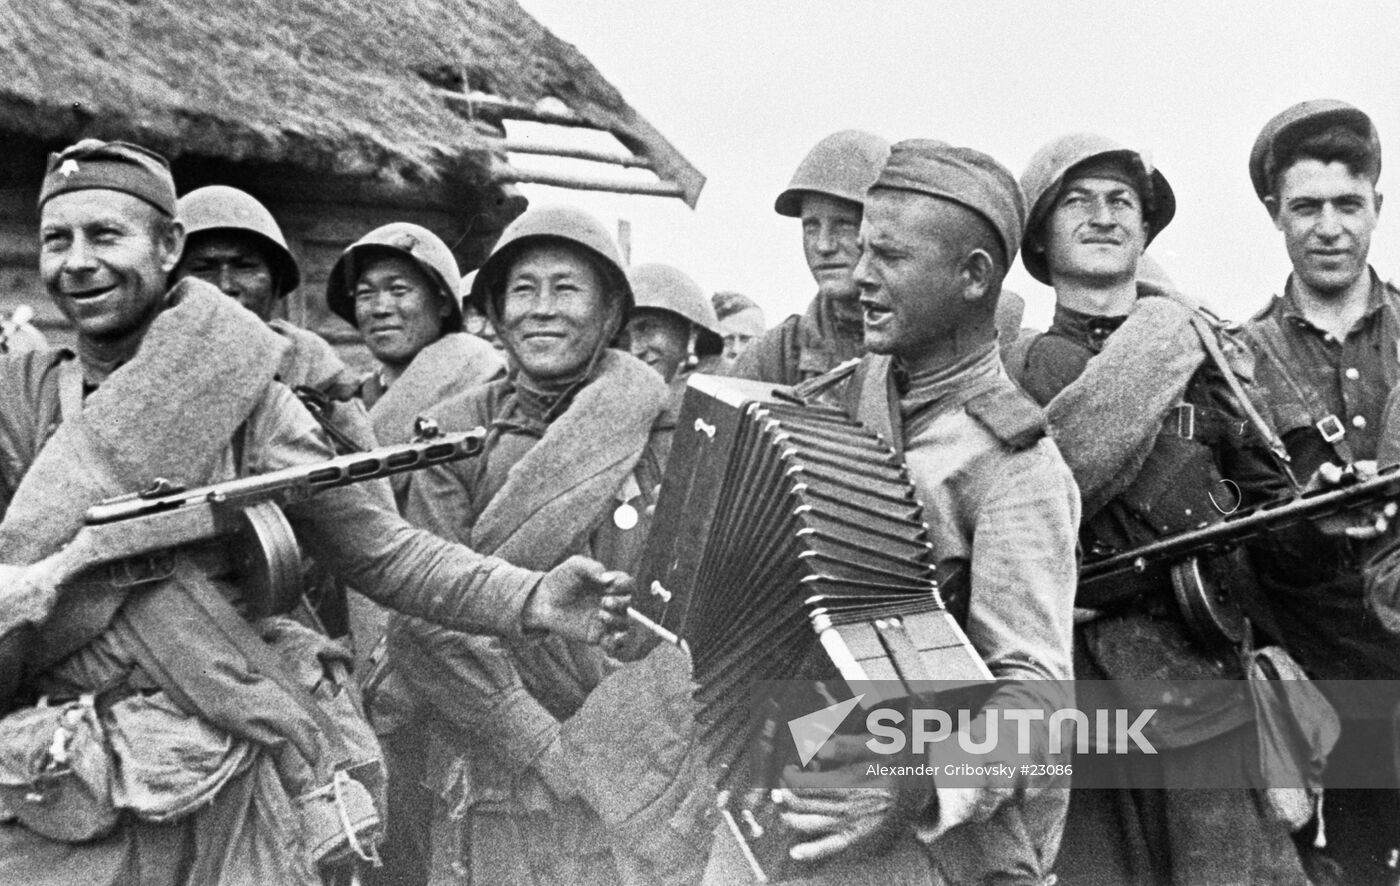 WWII SOLDIER ACCORDION PLAYING 